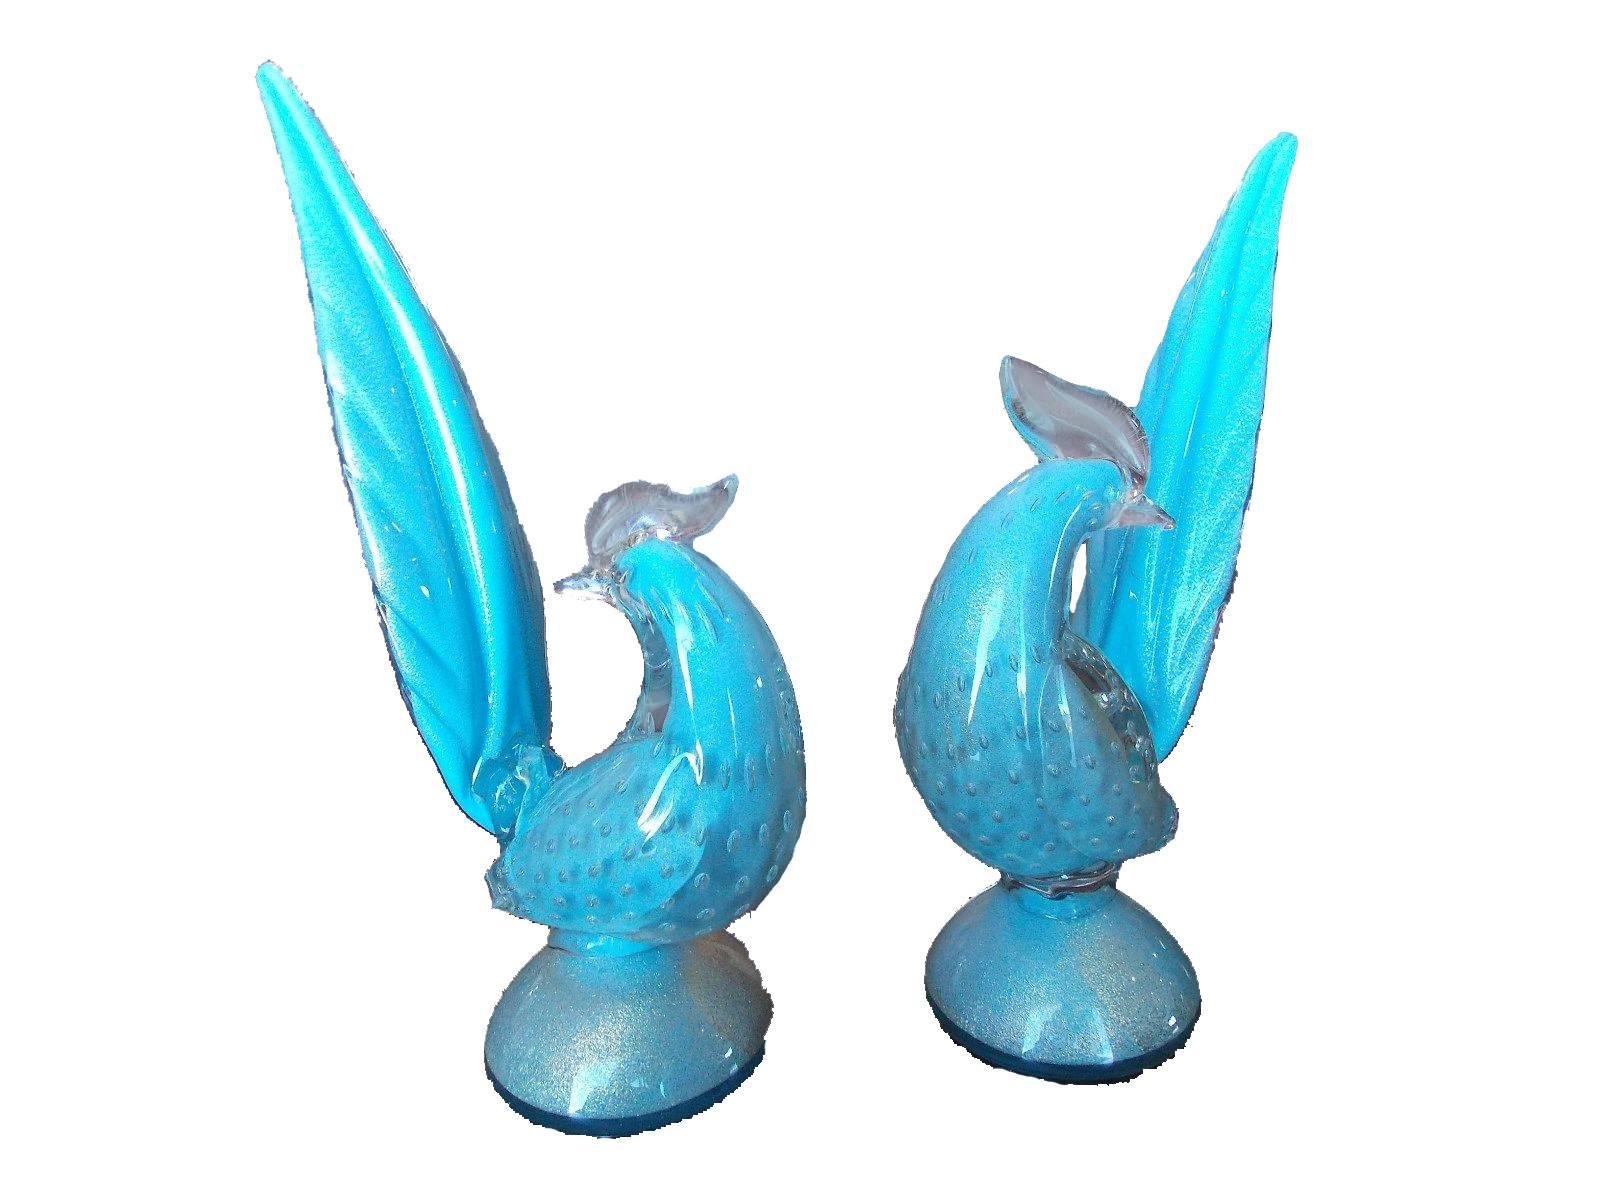 Mid-Century pair of Murano glass birds by Barbini. Robins egg blue with all-over bullicante (controlled bubbles) and gold flecks. One bird is slightly taller than the other.